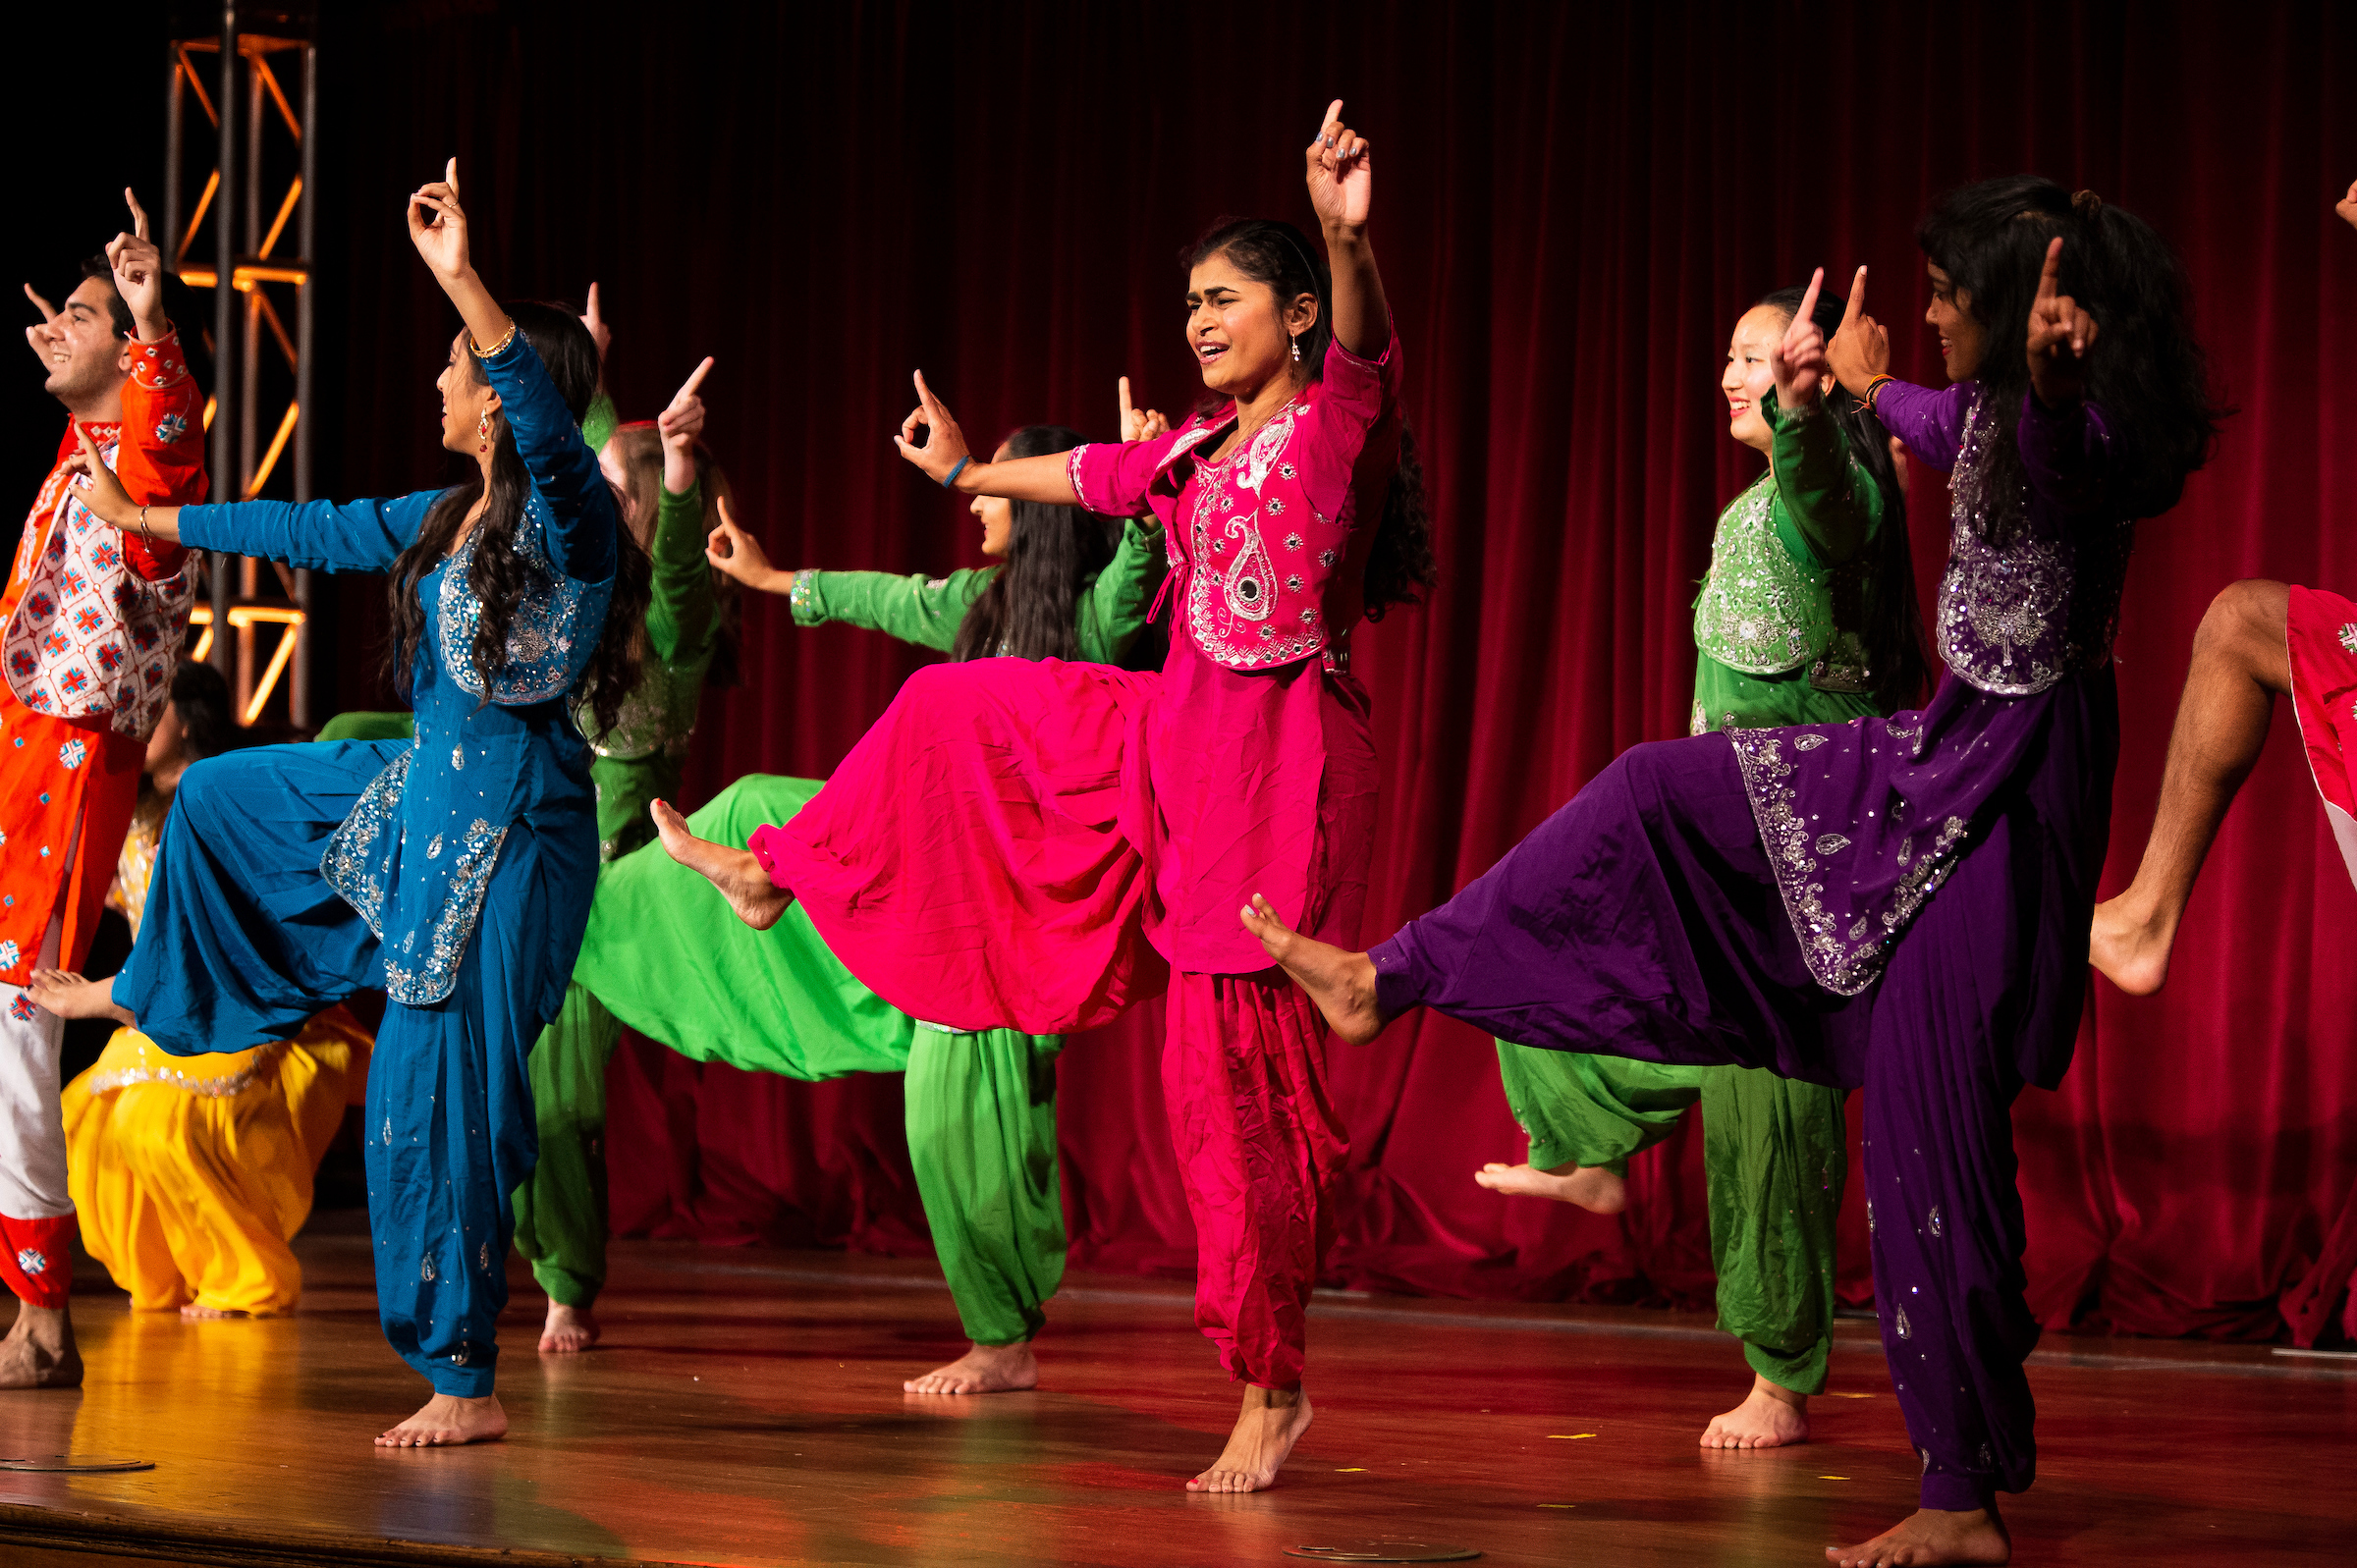 Students in colorful outfits perform in a South Asian dance showcase